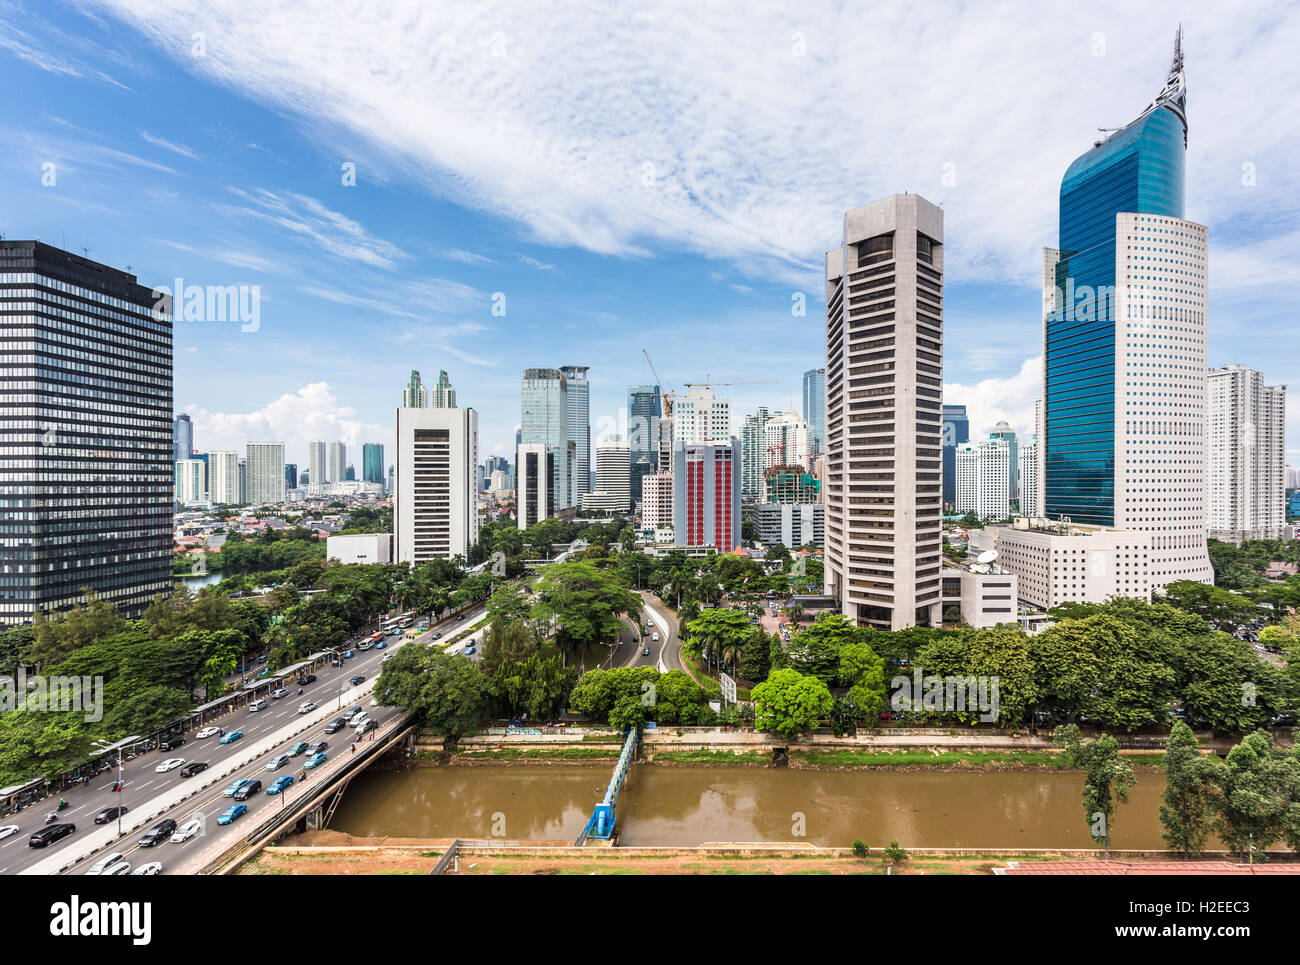 Jakarta skyline with modern office towers and hotels along Jalan Sudirman in Indonesia capital city business district. Stock Photo